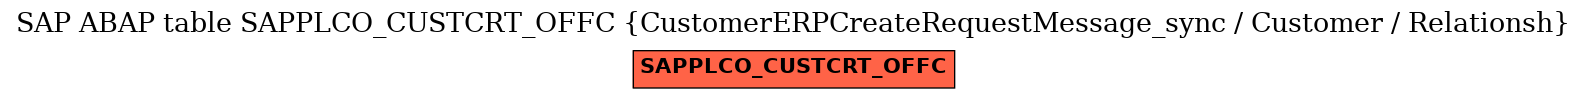 E-R Diagram for table SAPPLCO_CUSTCRT_OFFC (CustomerERPCreateRequestMessage_sync / Customer / Relationsh)